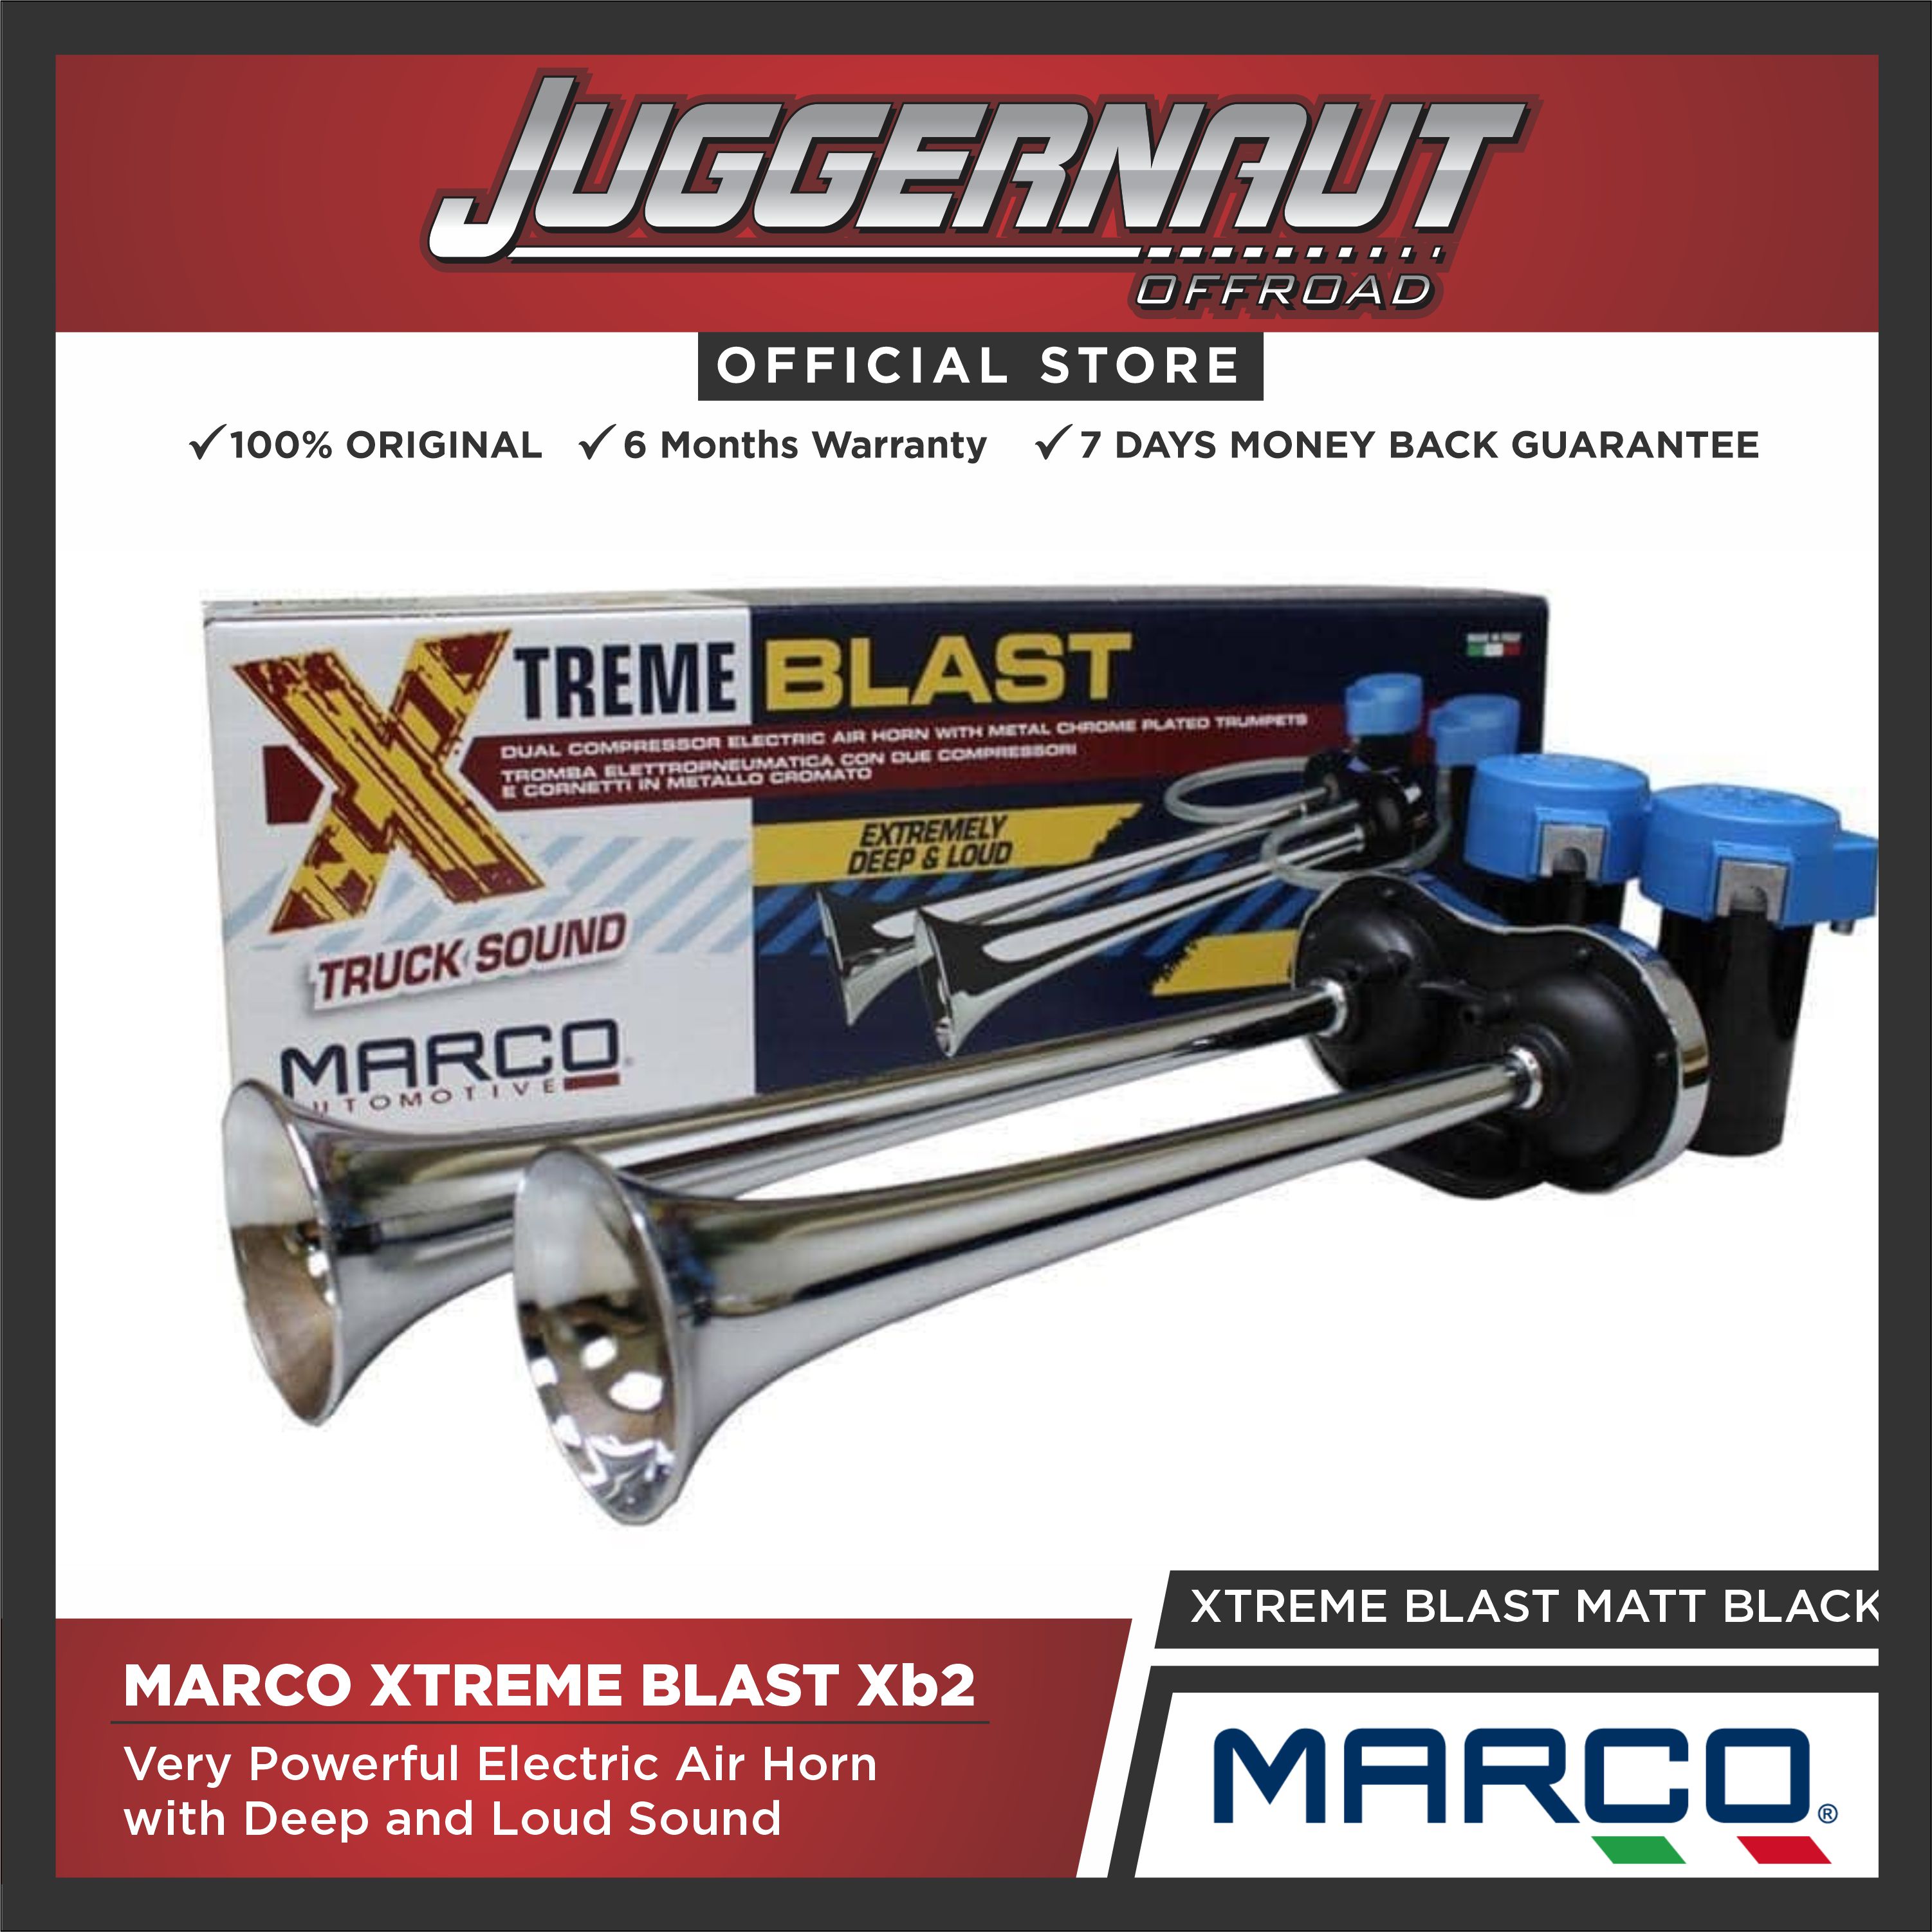 Marco Extreme Blast XB2 Powerful Electric Air Horn with Double Compressor  PN#MARCOXB2 Made in Italy Original